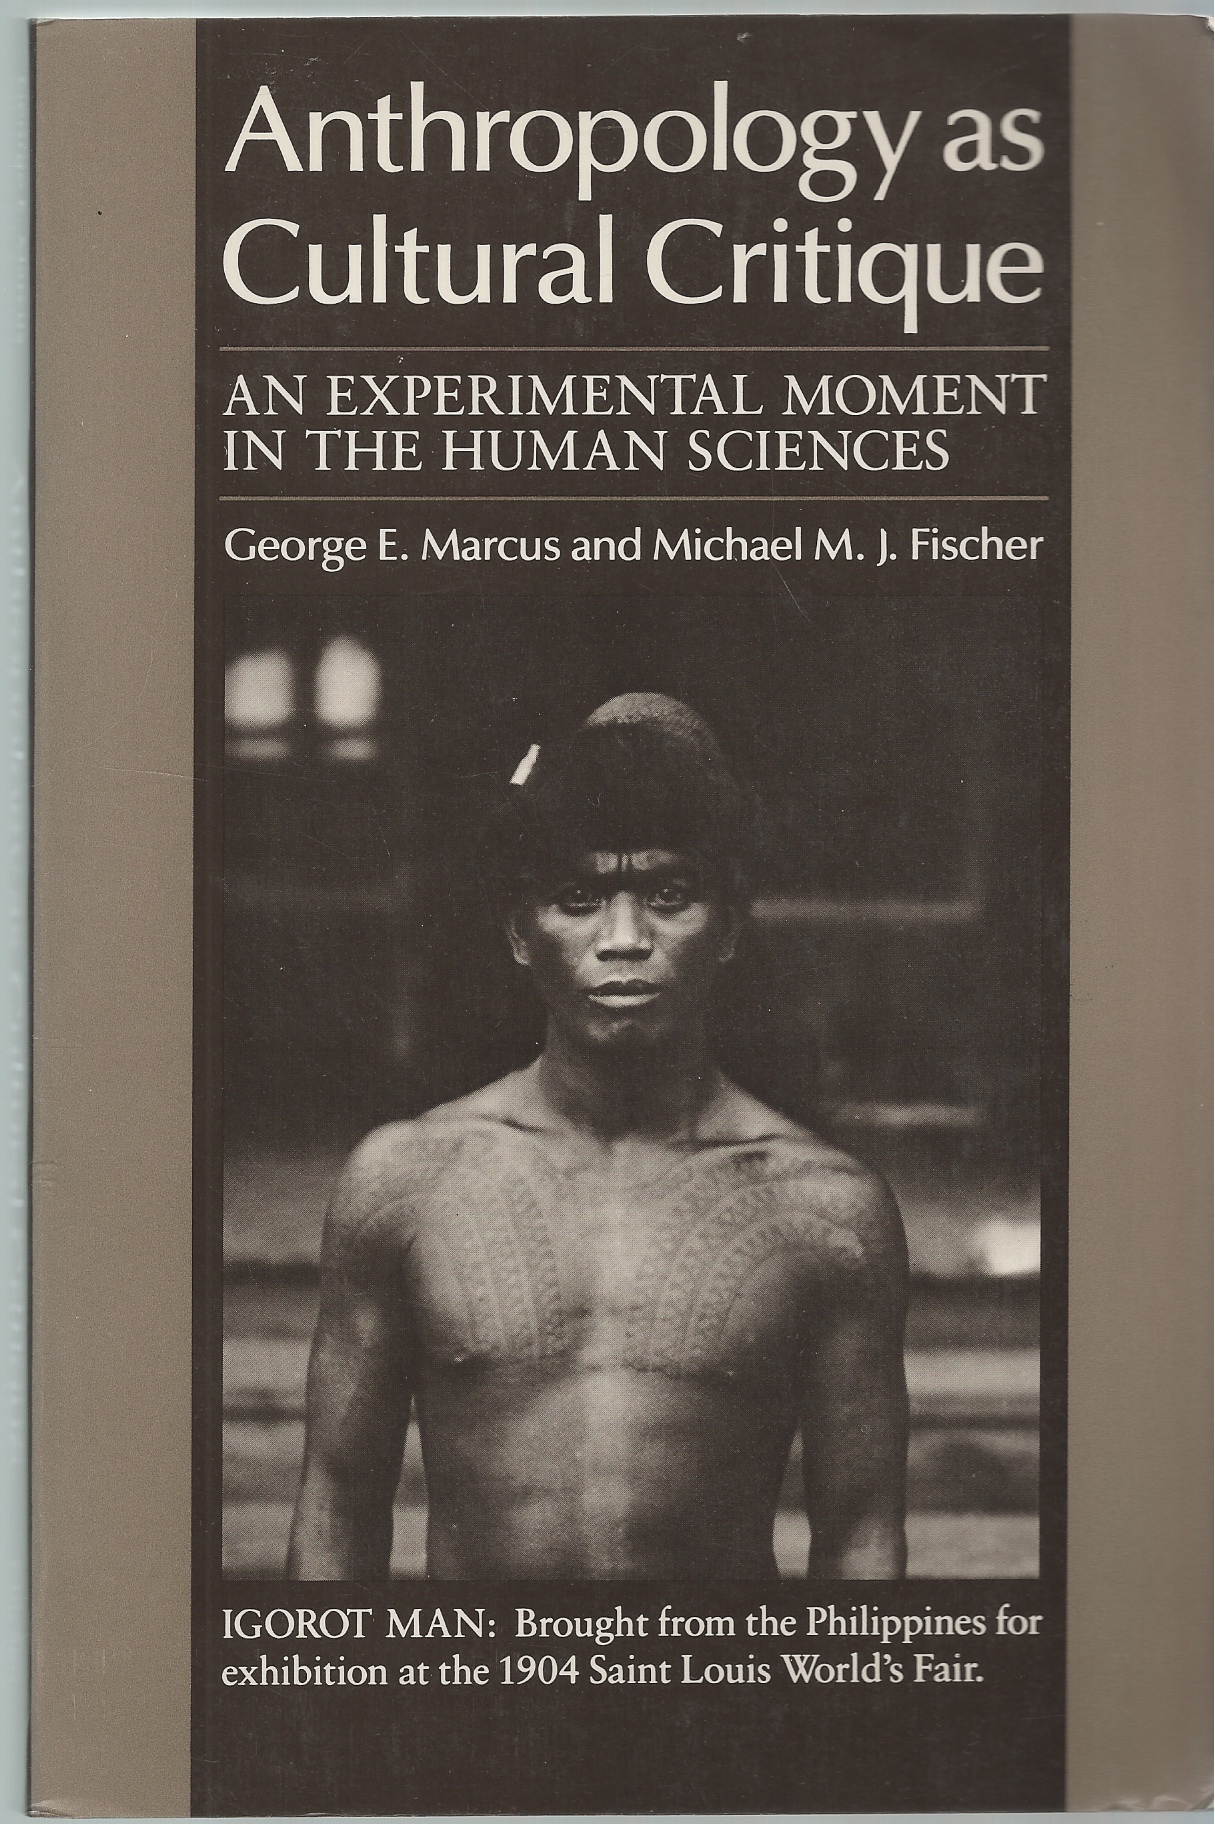 MARCUS GEORGE E. & FISCHER MICHAEL M.J. - Anthropology As Cultural Critque an Experimental Moment in the Human Sciences